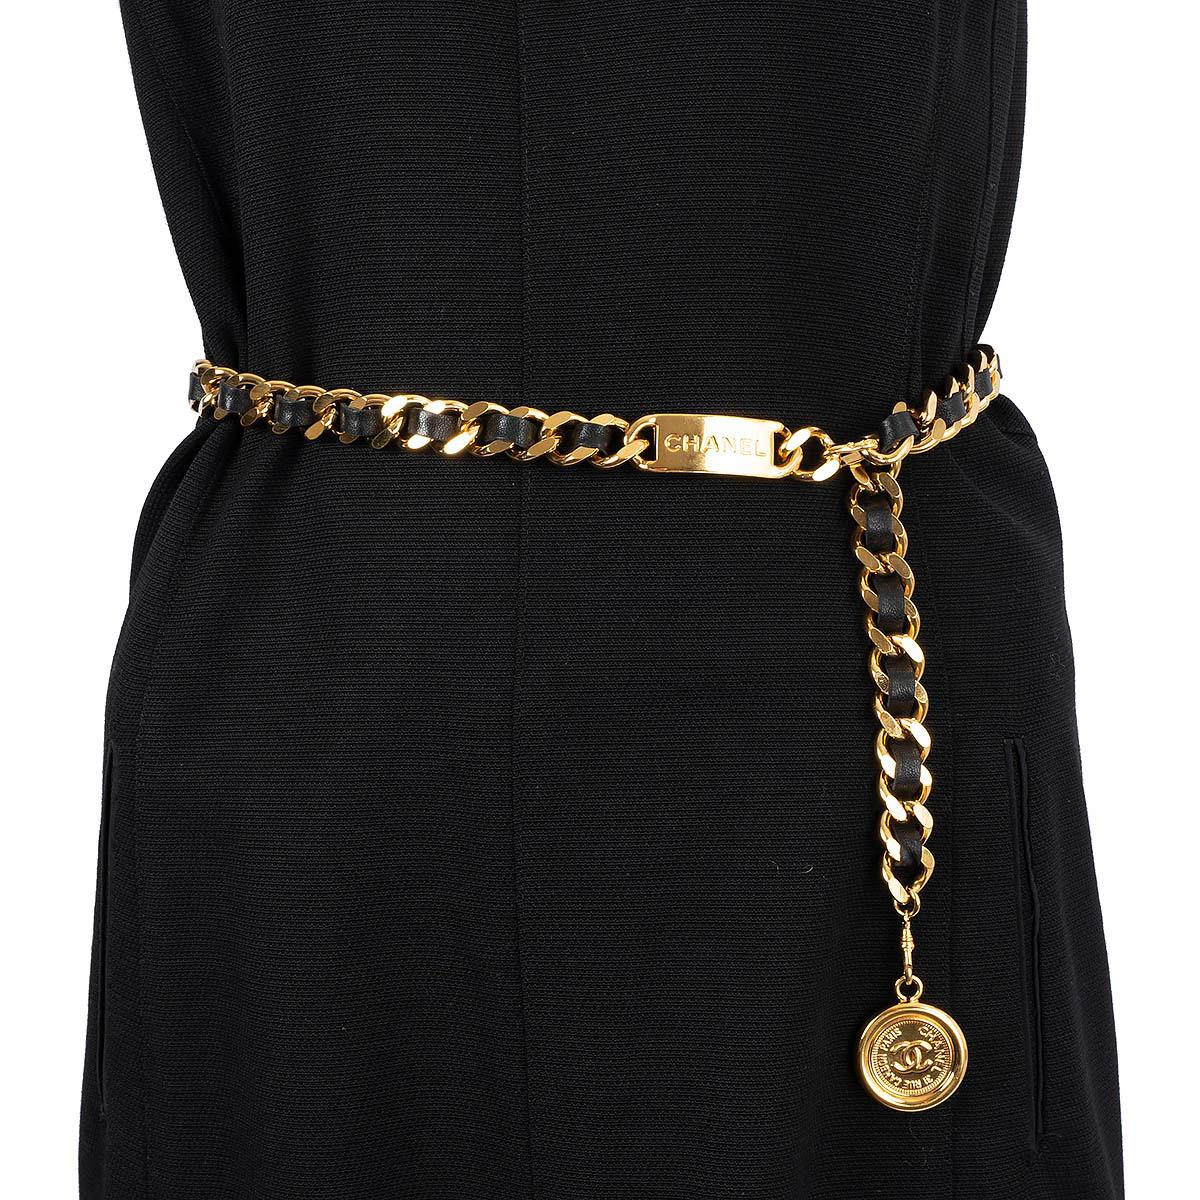 100% authentic Chanel 1995 gold-tone chain & black leather belt with dangling CC medallion. Has been worn once or twice and is in virtually new condition. Comes with box. 

Measurements
Model	Chanel95P
Tag Size	OS
Width	1.8cm (0.7in)
Fits To	80cm